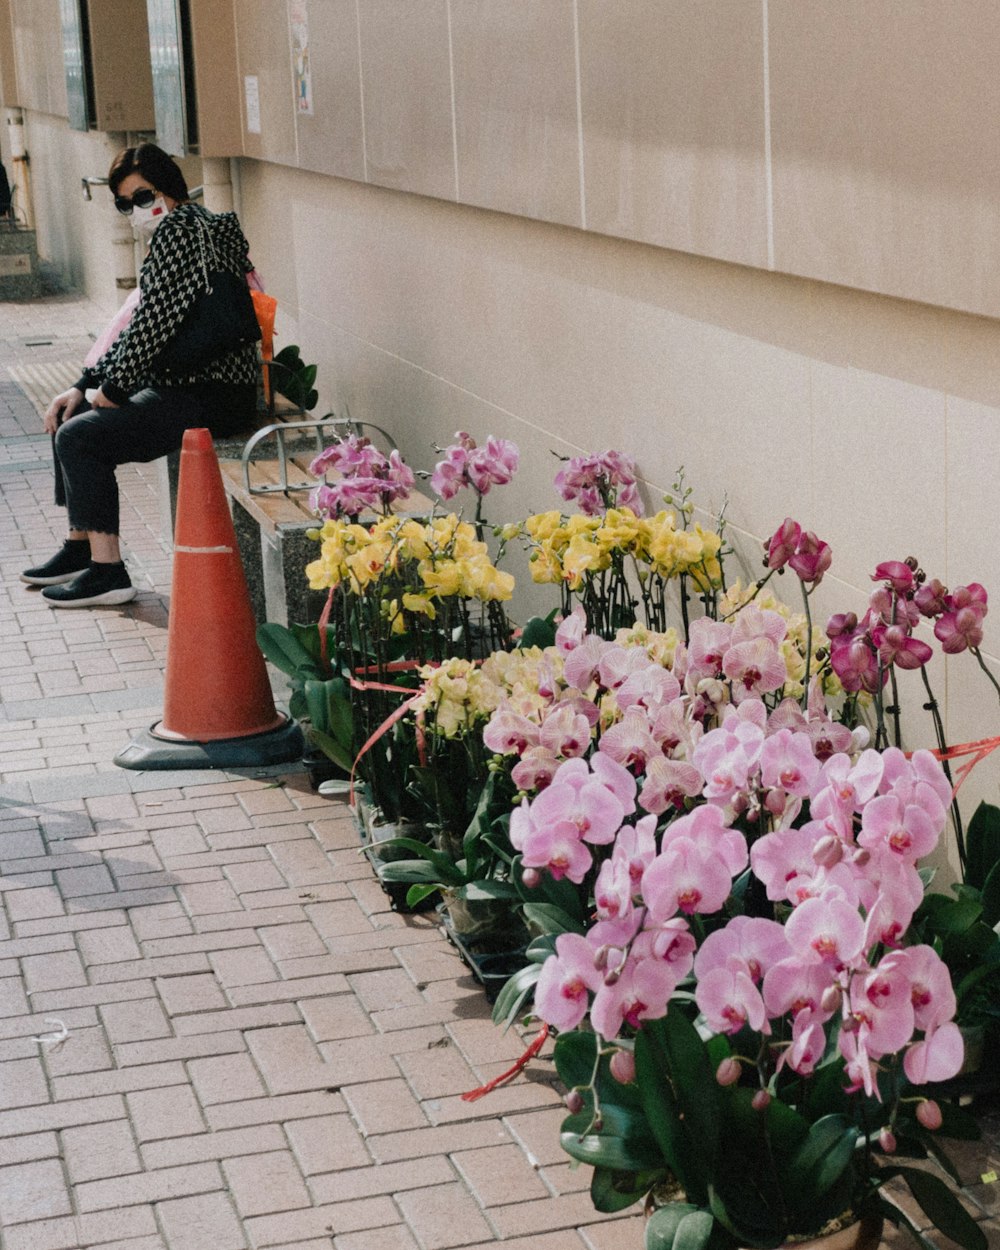 a woman sitting on a bench next to a row of flowers